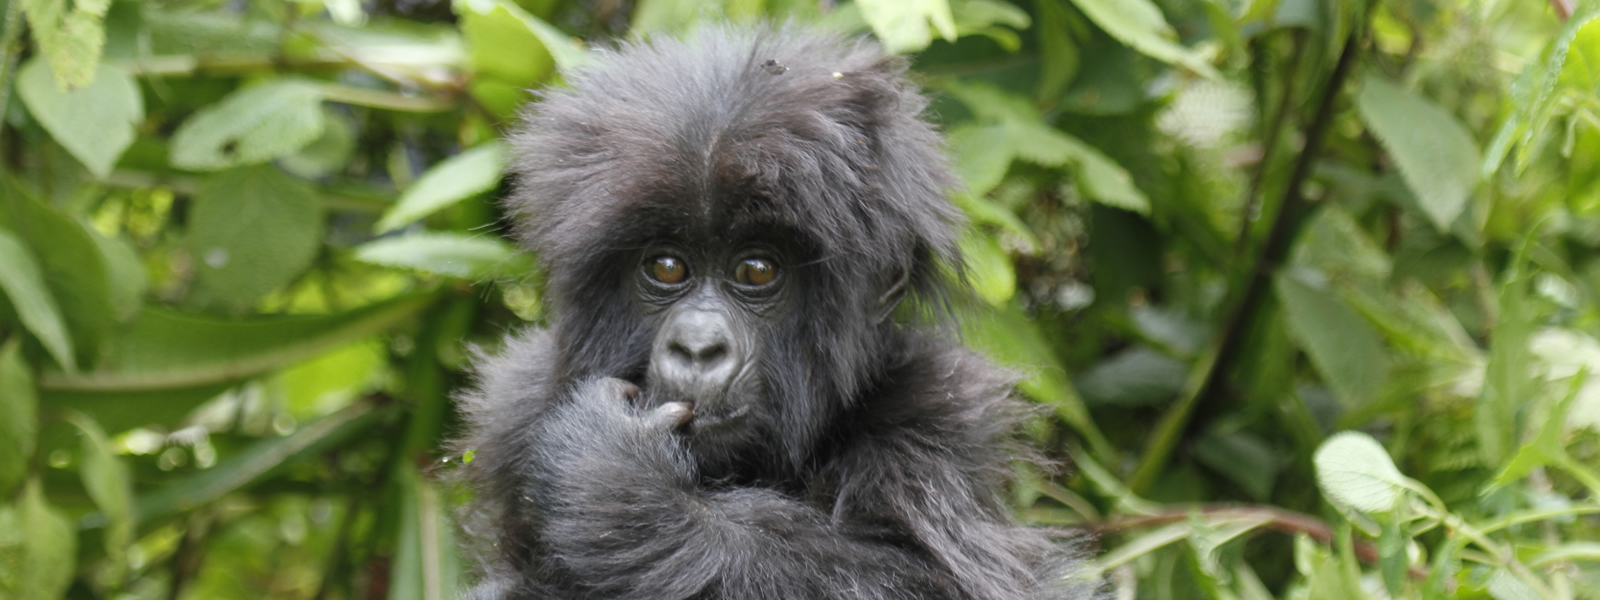 best time to book a gorilla habituation safari experience In Uganda depends on various factors, including weather conditions, gorilla movements, and availability of permits. In Uganda, where most gorilla habituation experiences take place